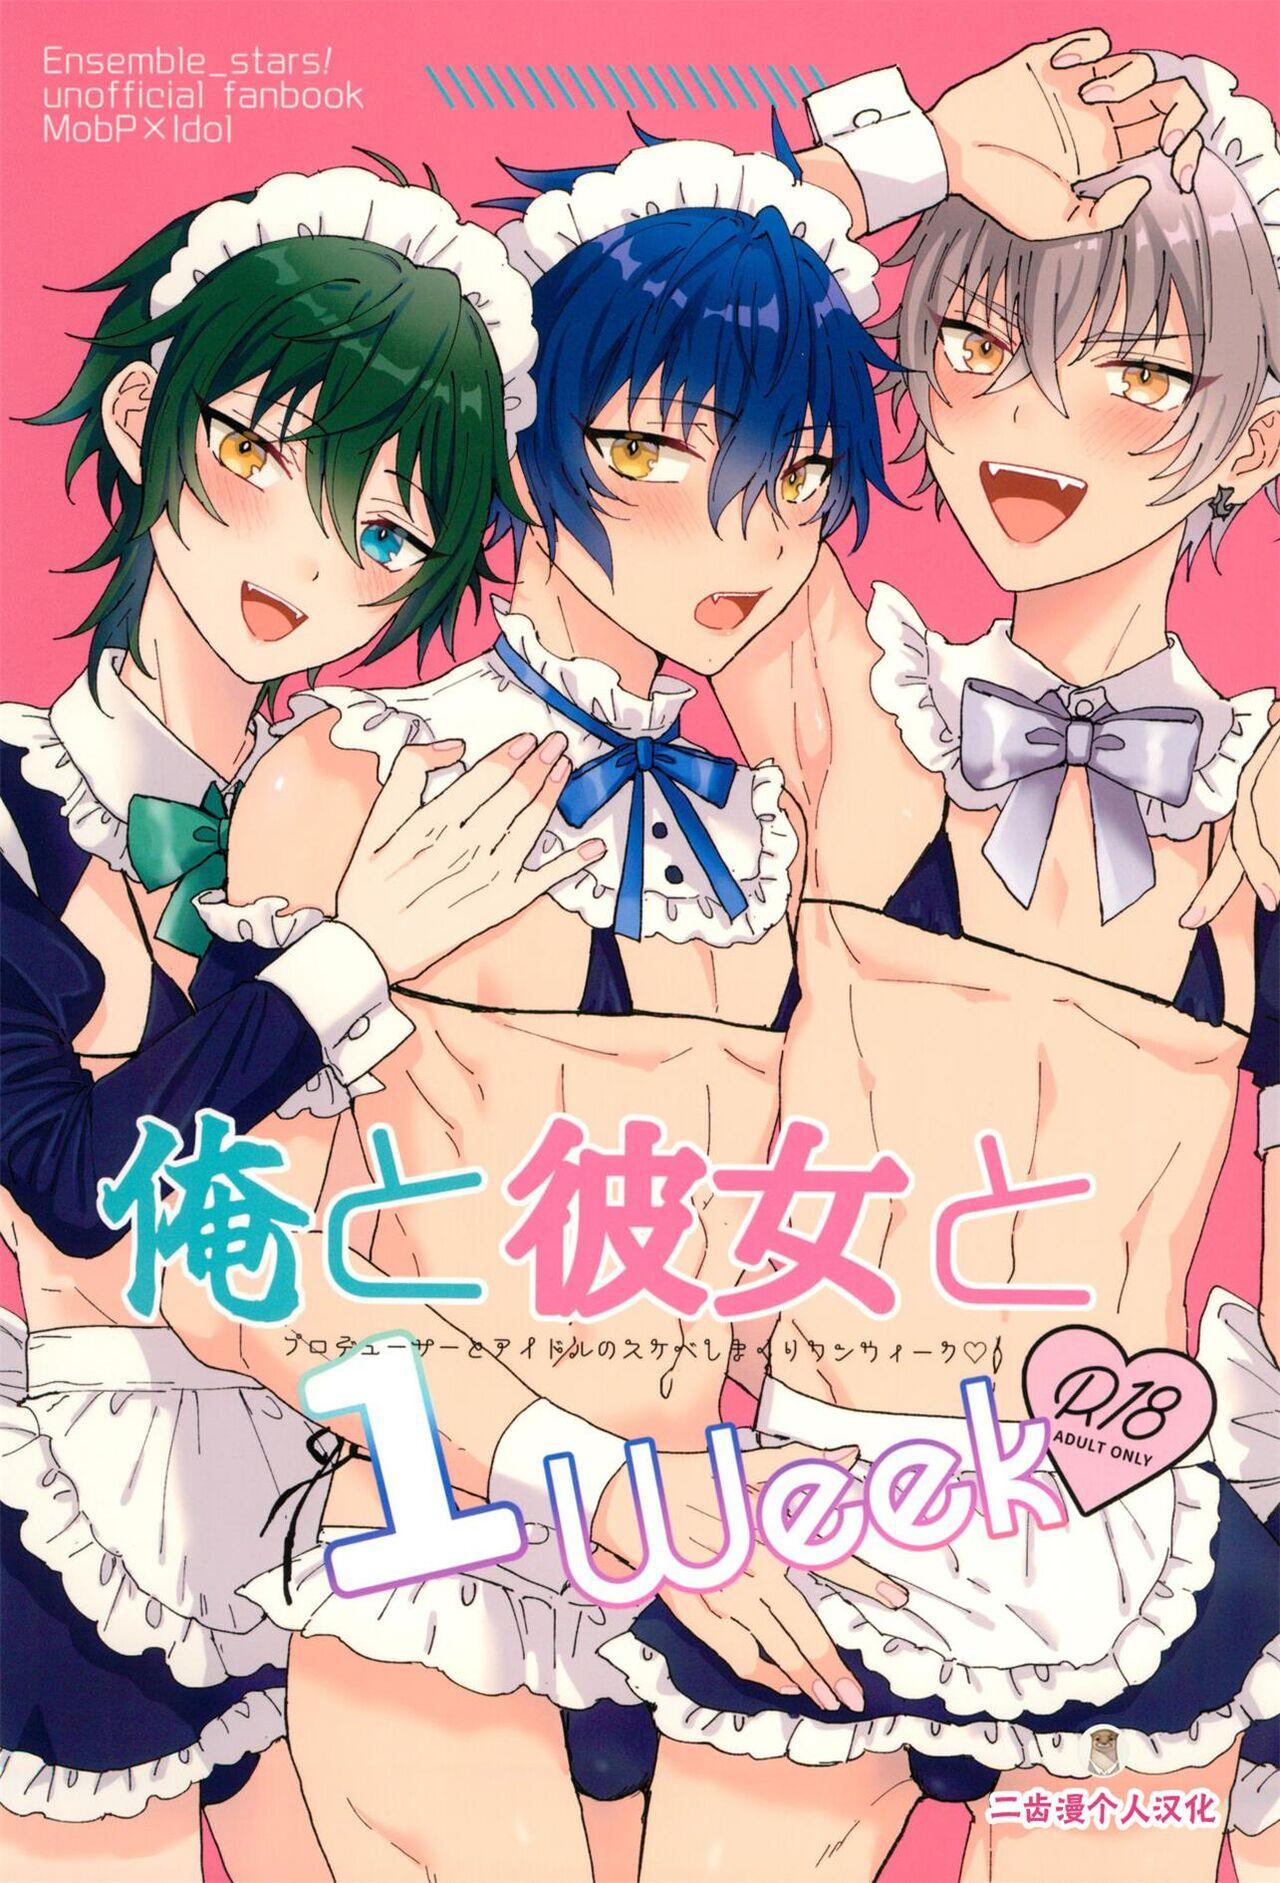 Homosexual Ore to kanojo to 1 week - Ensemble stars Gay Reality - Page 1